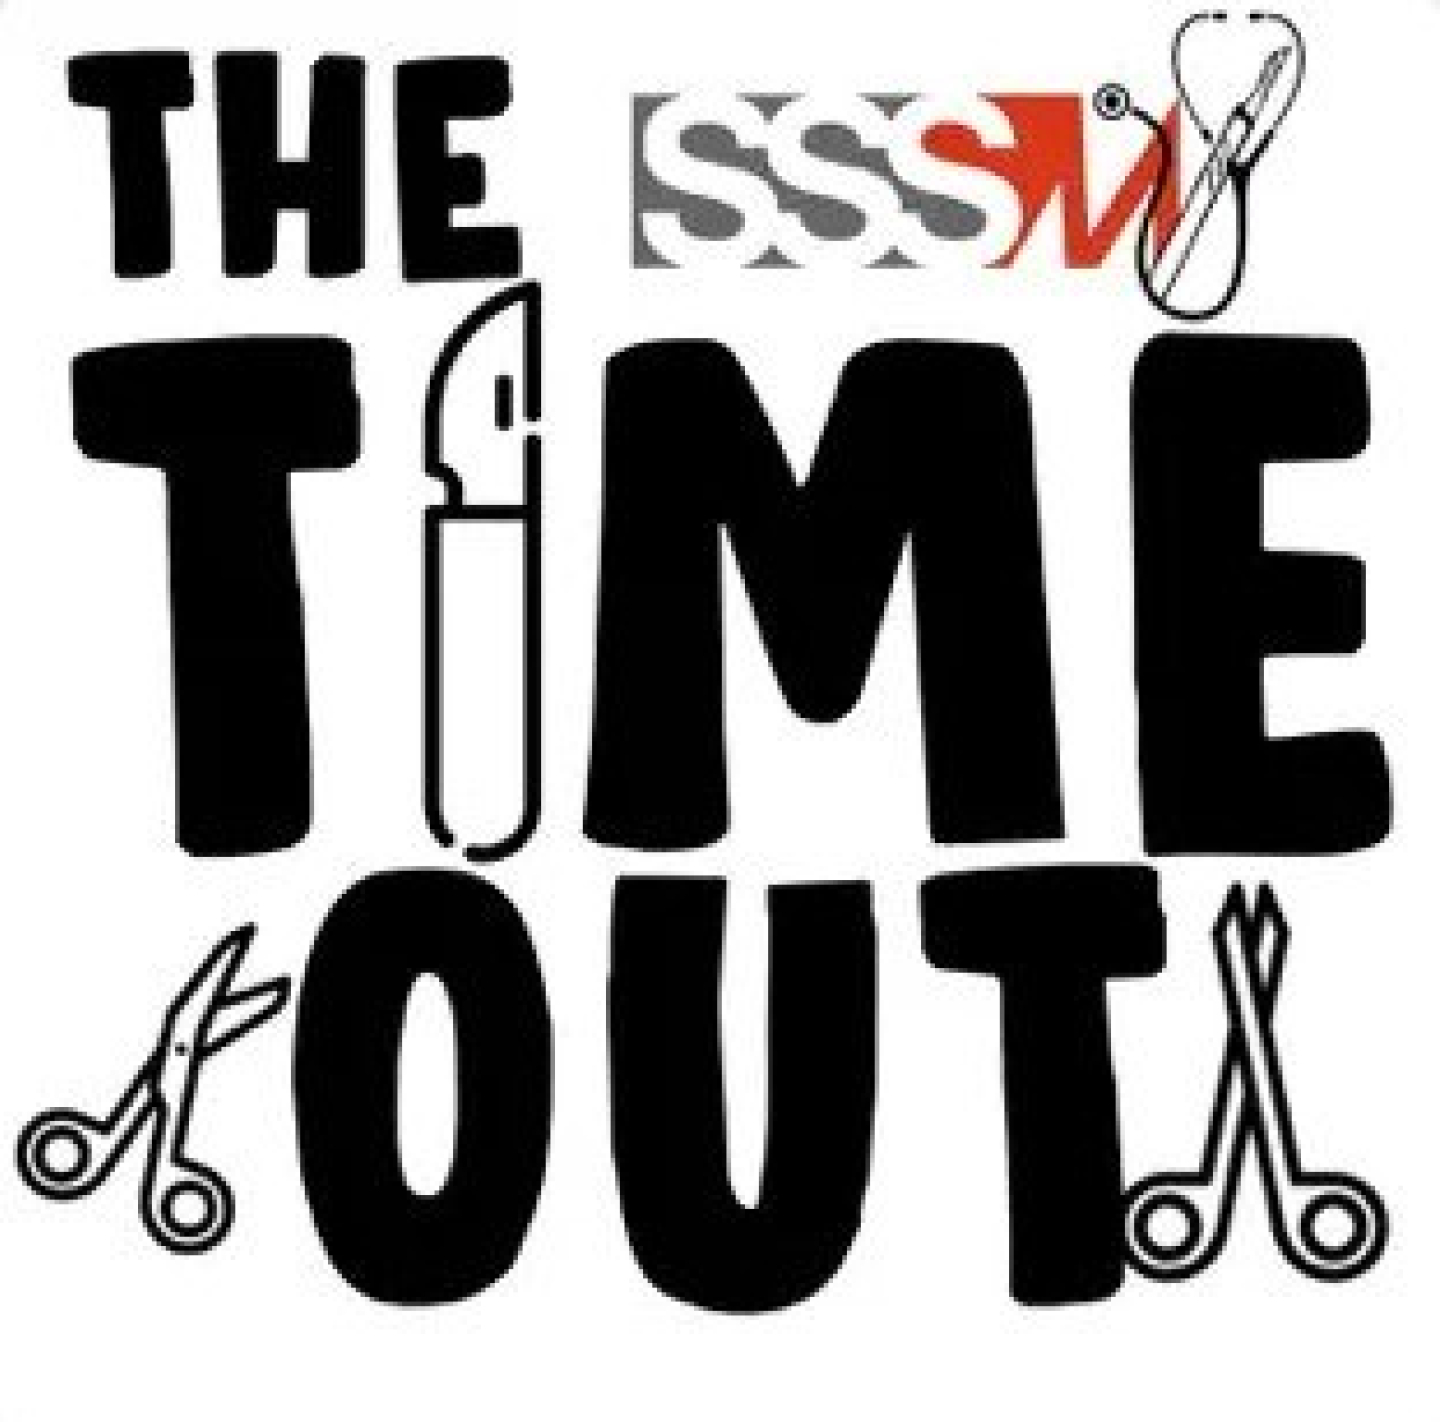 Time Out Podcast